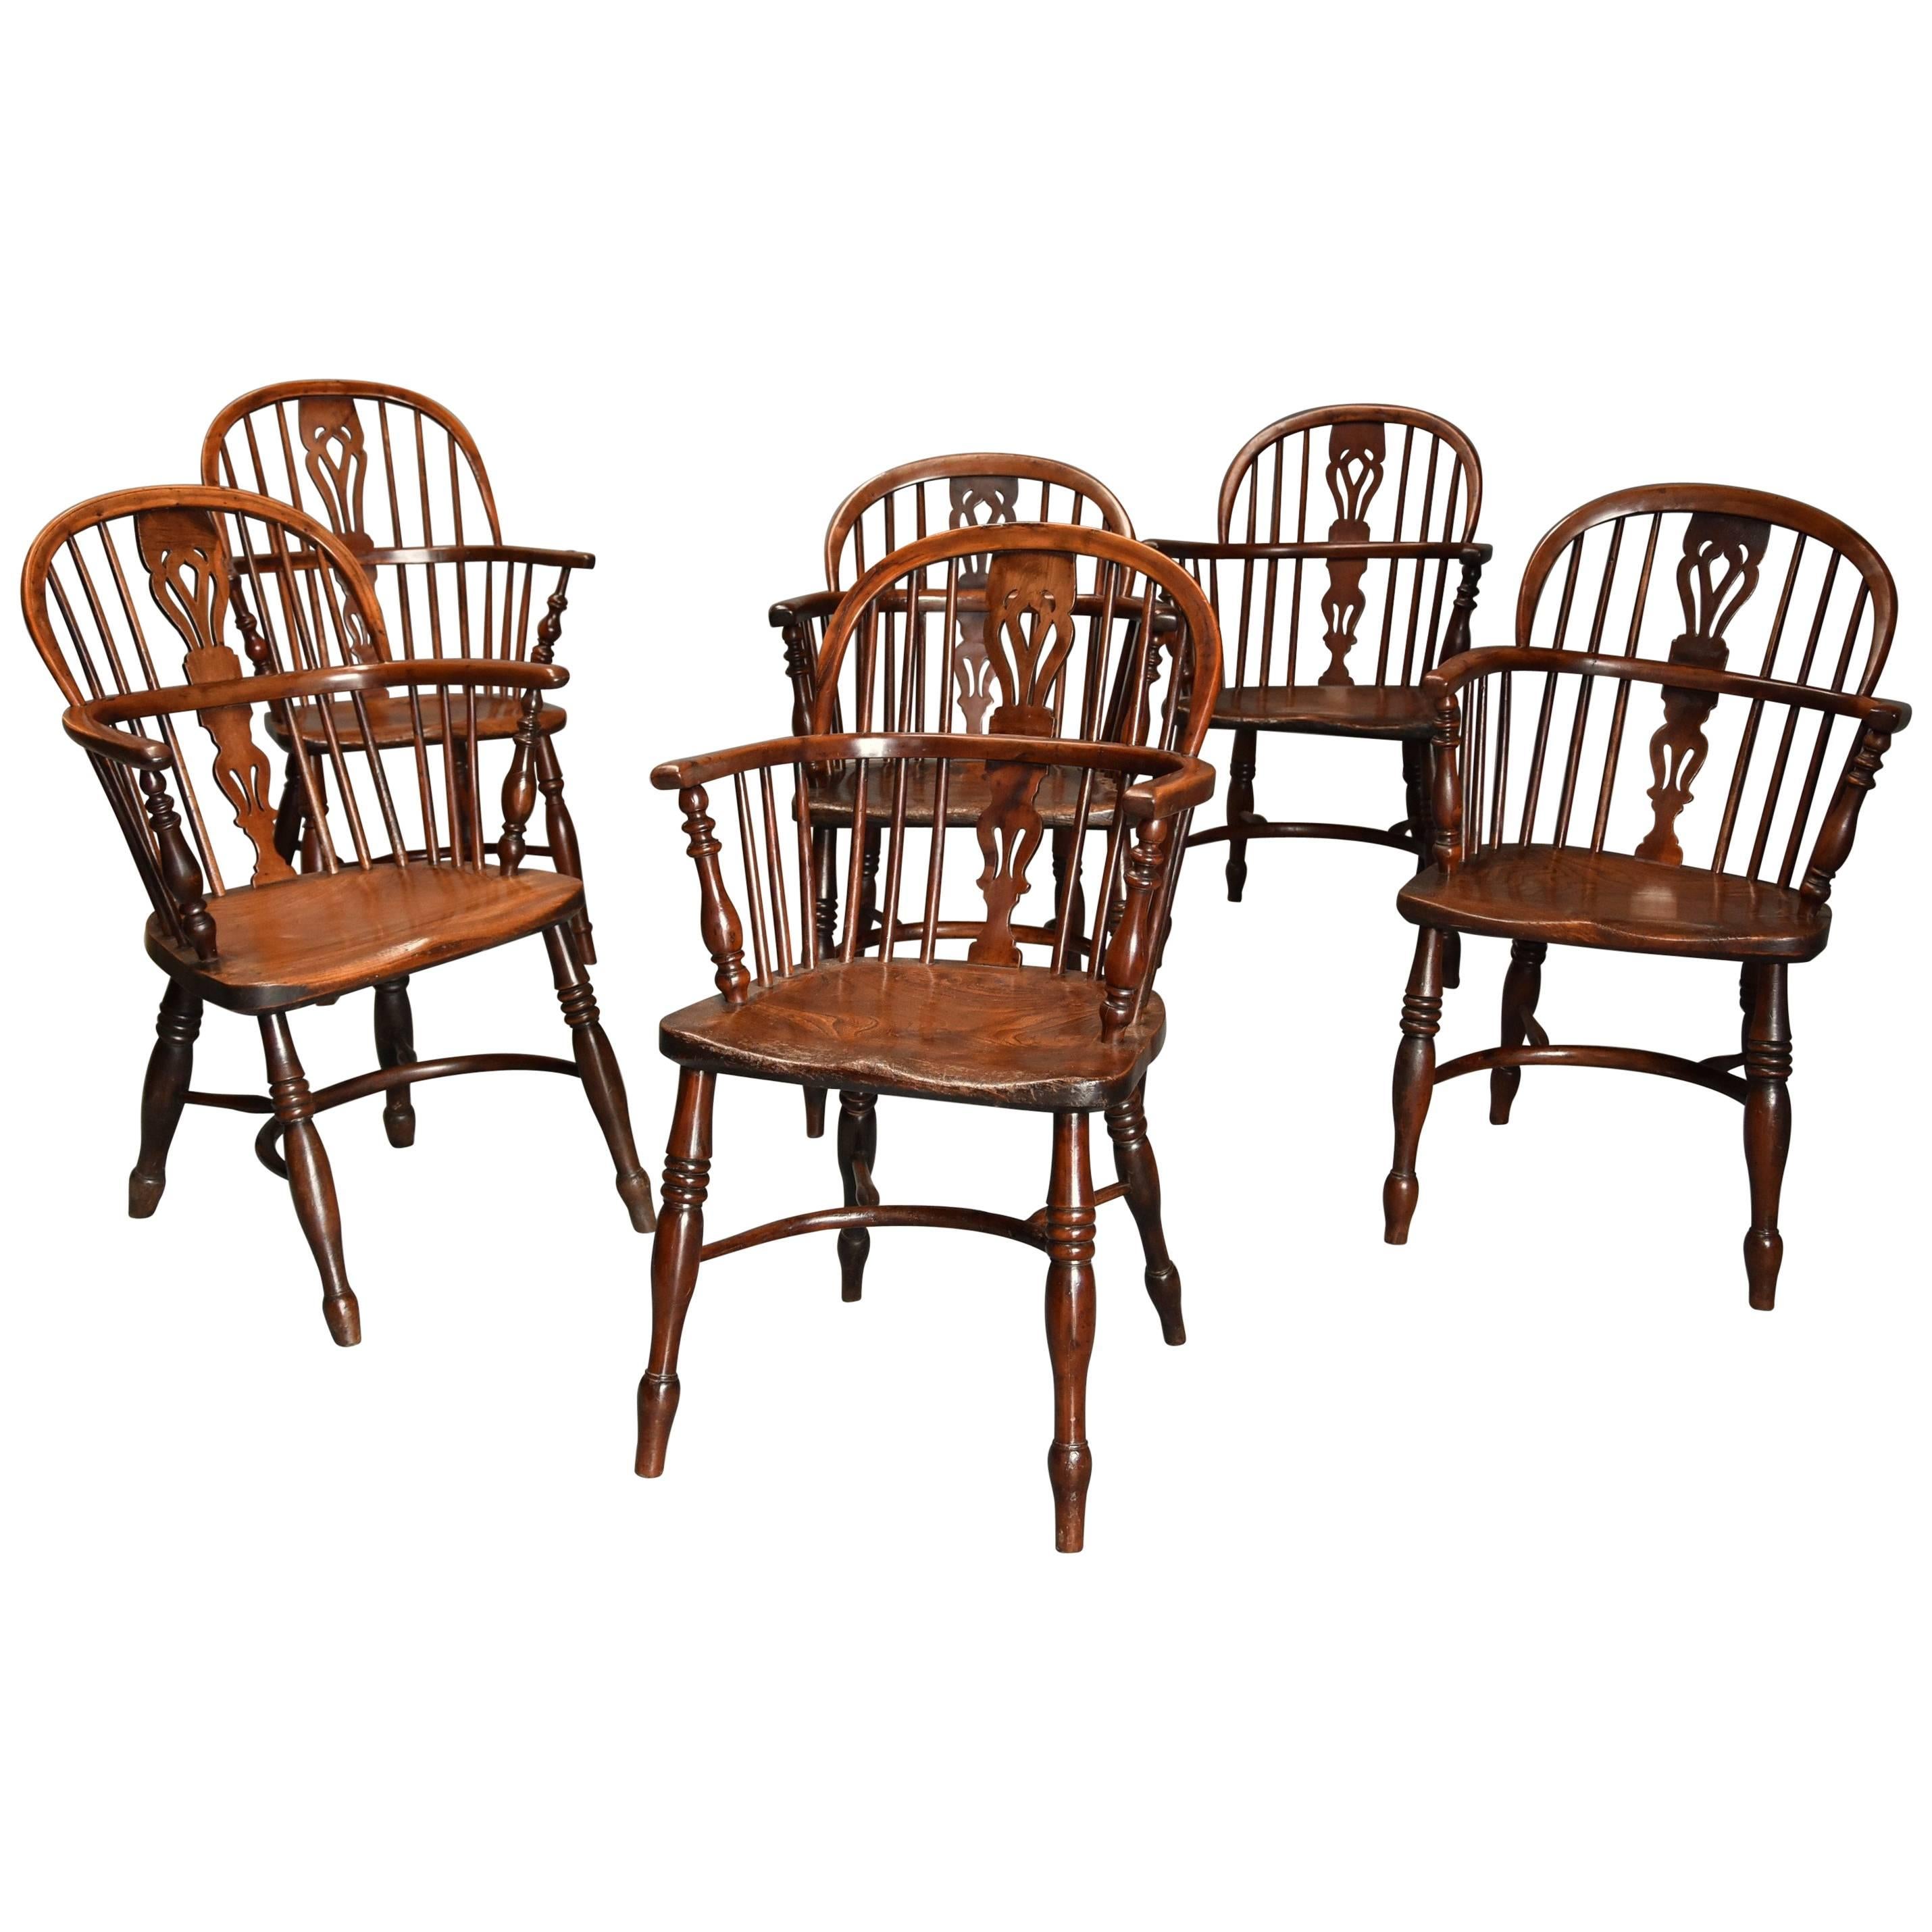 Mid-19th Century Well Matched Set of Six Yew Wood Low Back Windsor Armchairs For Sale